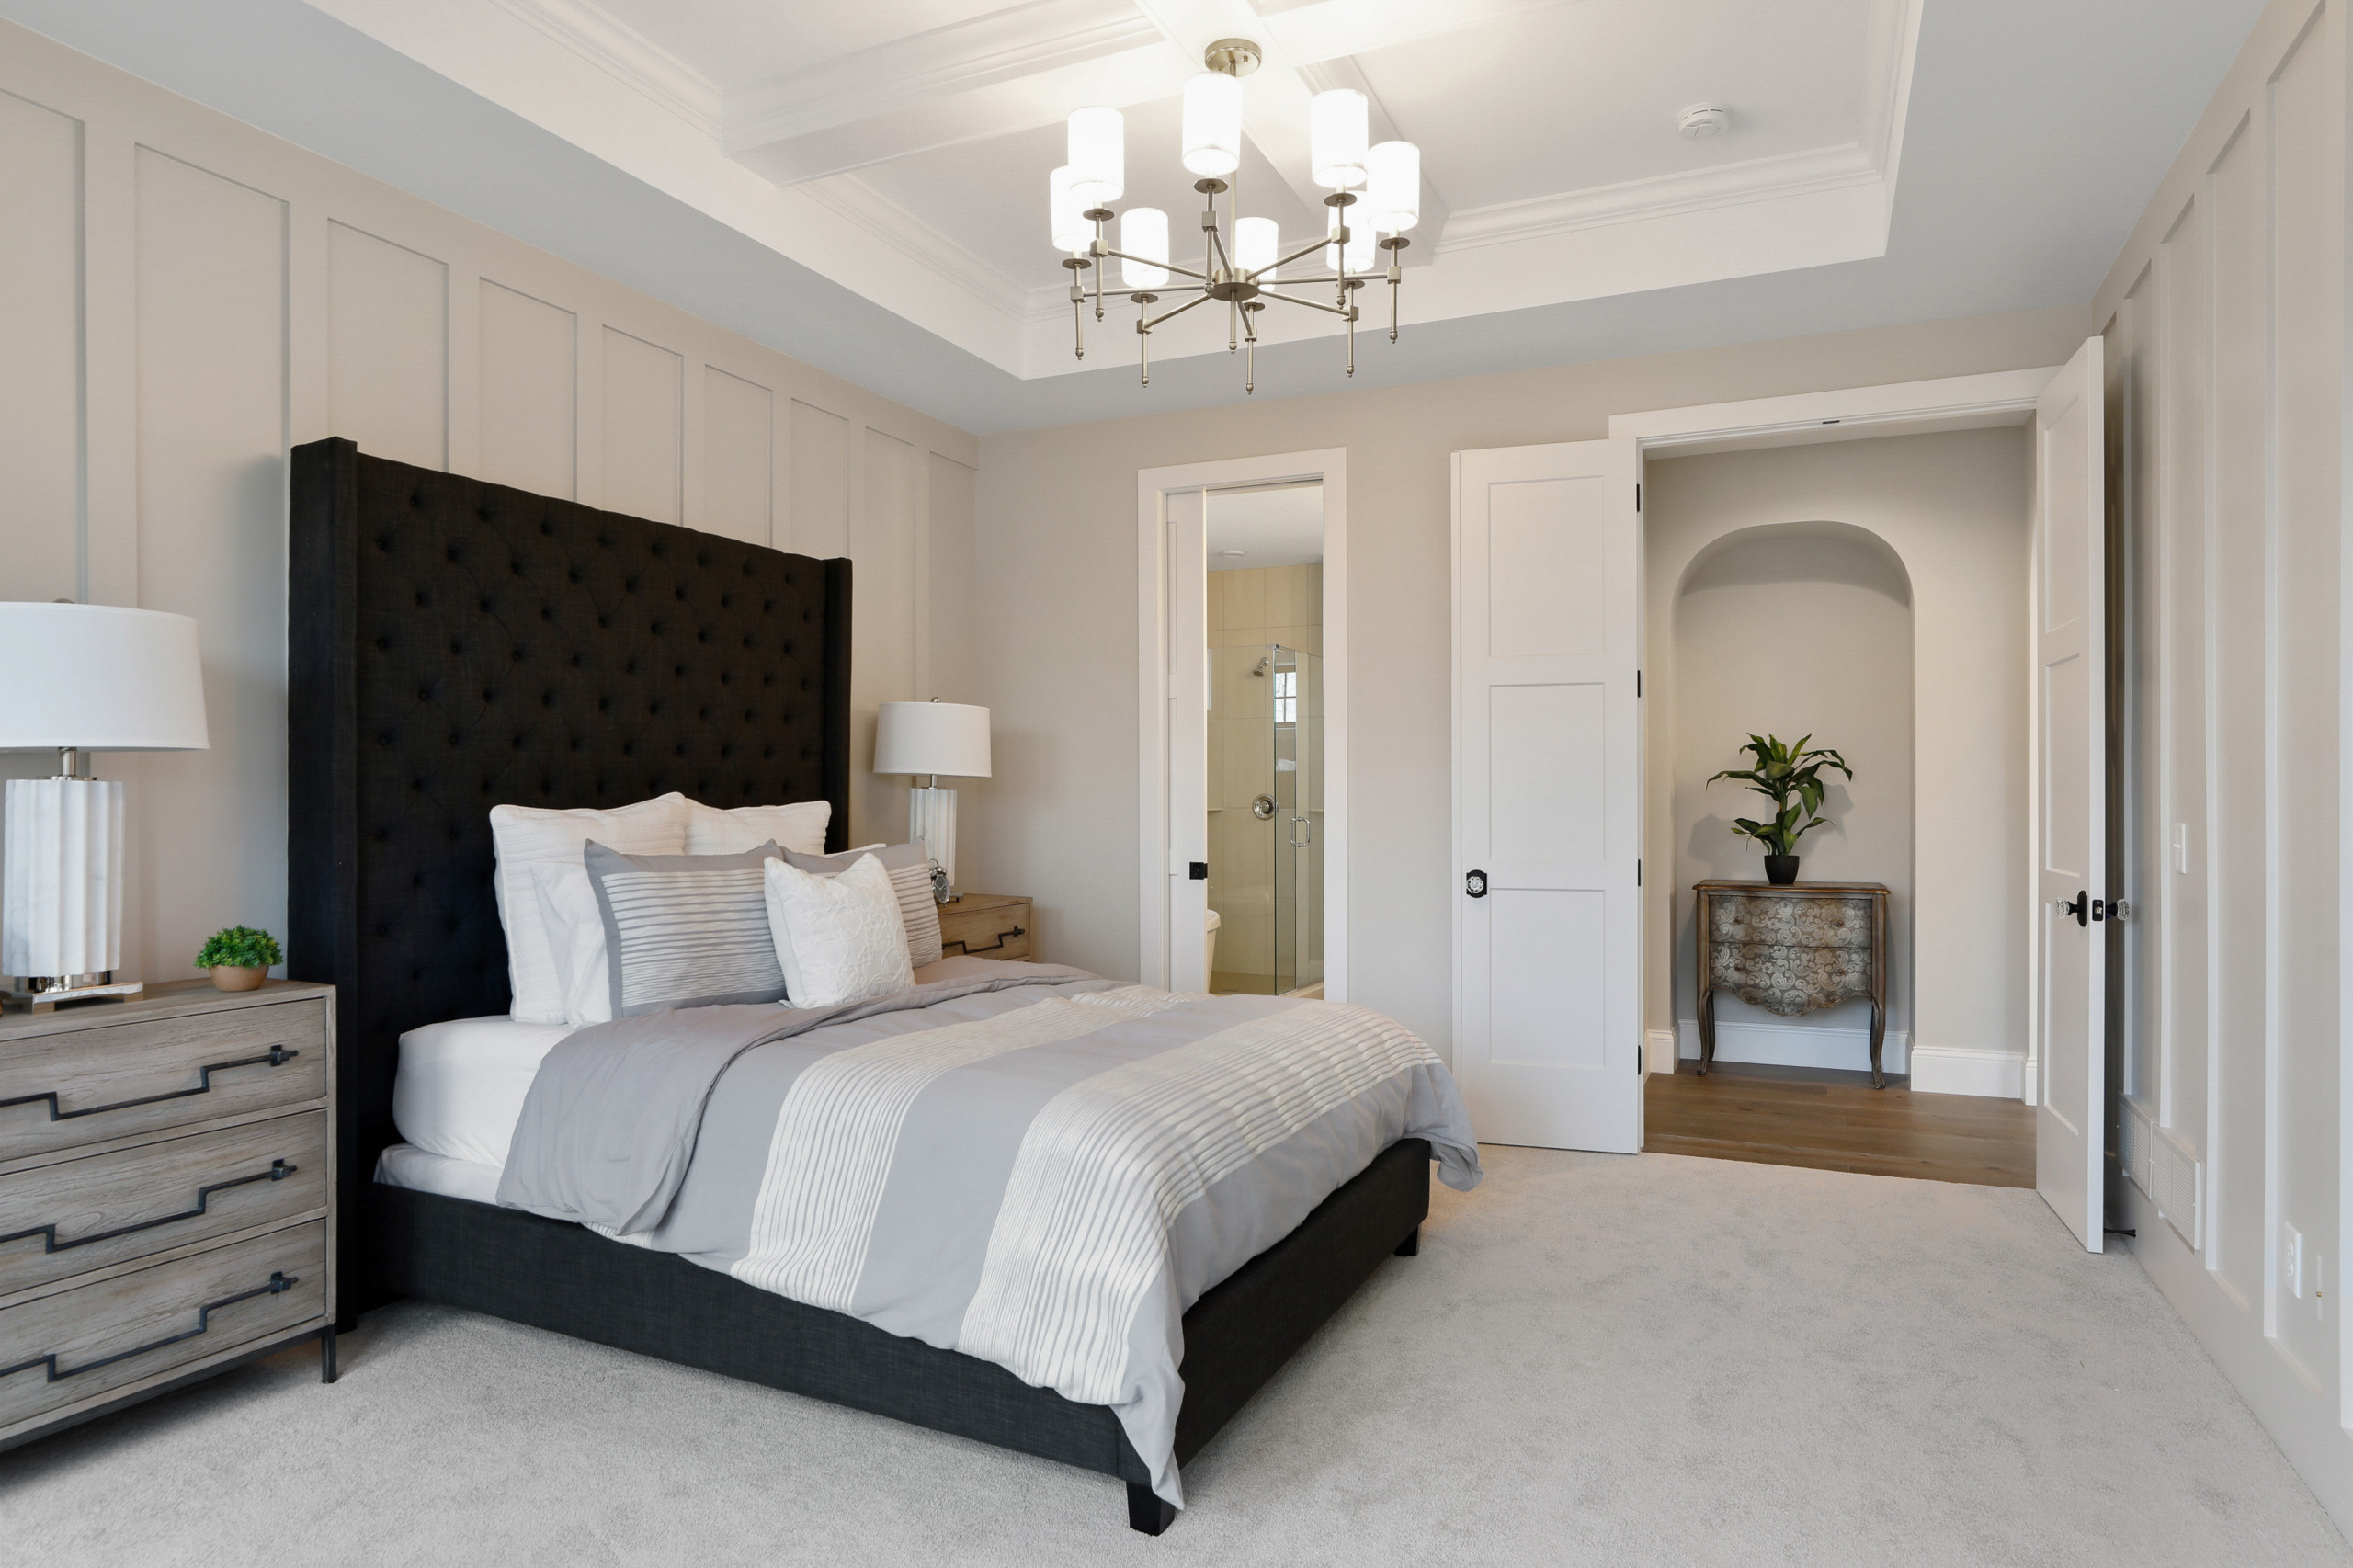 75 Wall Paneling Bedroom Ideas You'll Love - October, 2023 | Houzz